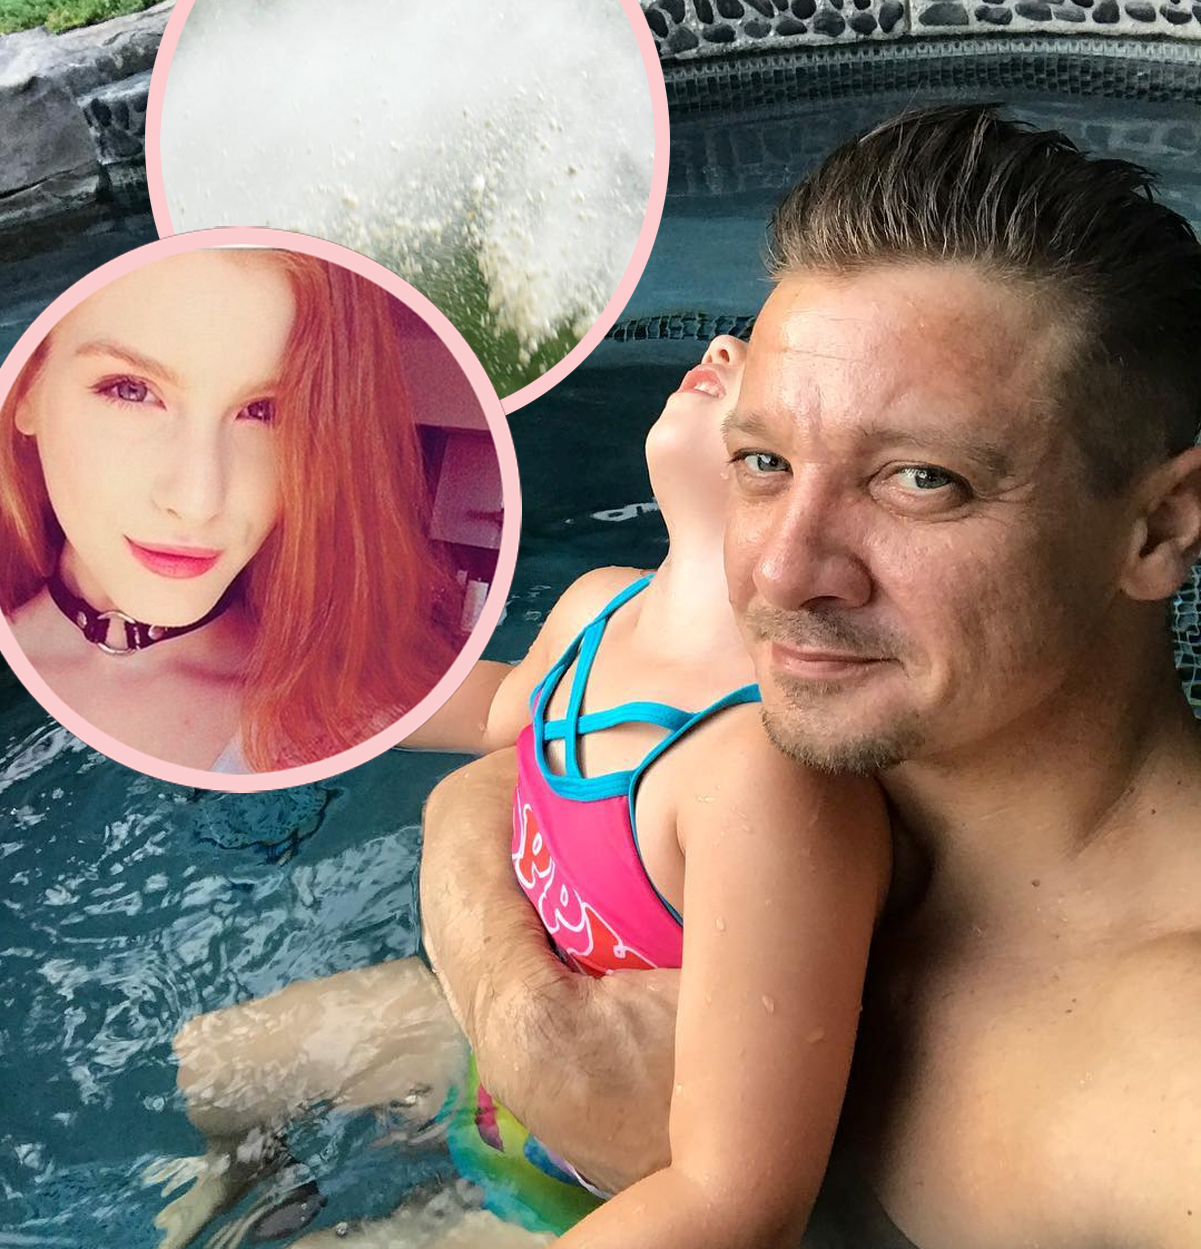 Jeremy Renner Exes Come Forward, Claim He Threw Wild Parties, Did Cocaine, and Had Threesomes While Watching Daughter!